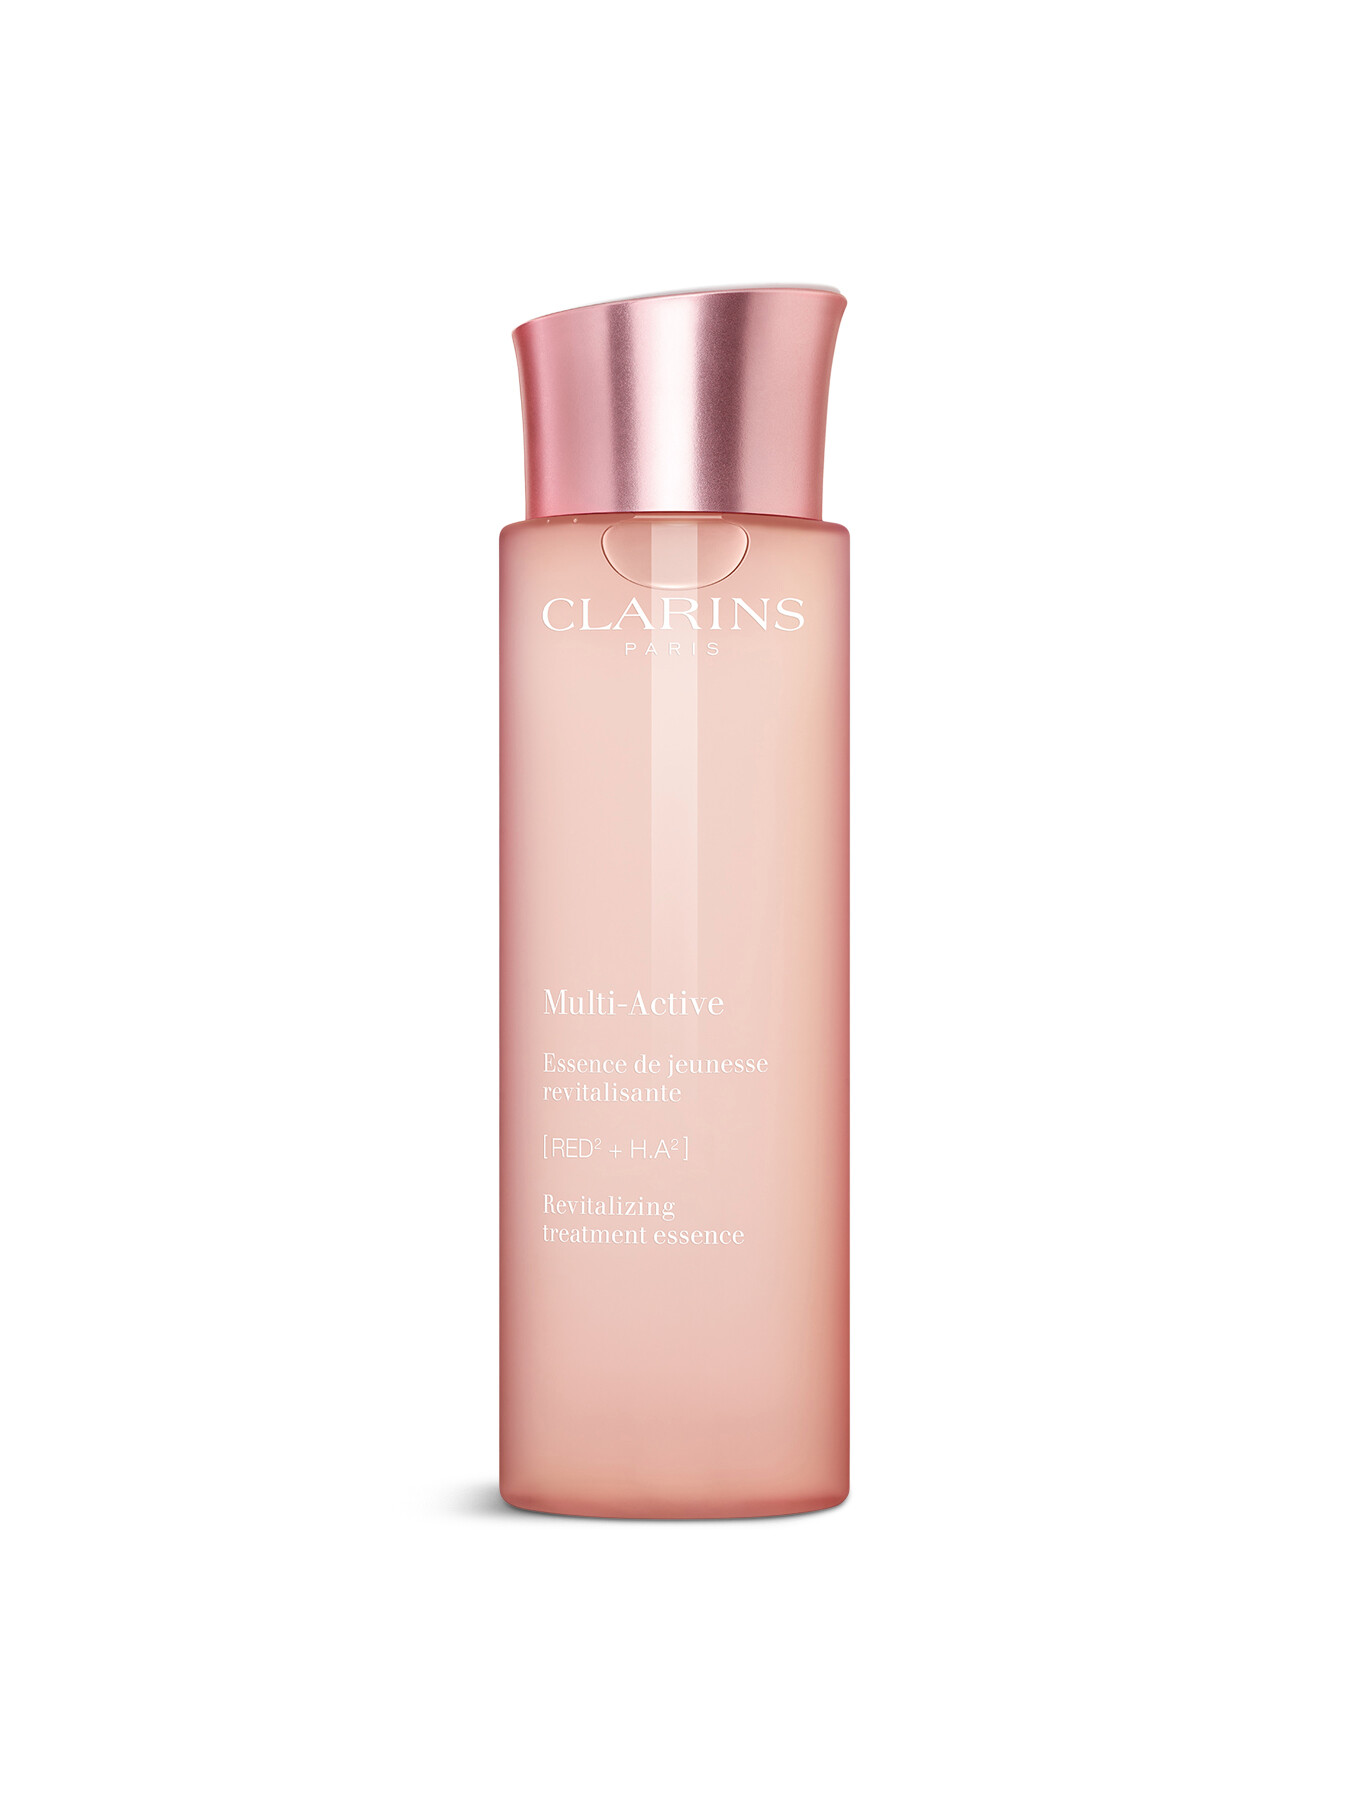 Clarins Multi-active Revitalizing Treatment Essence In White